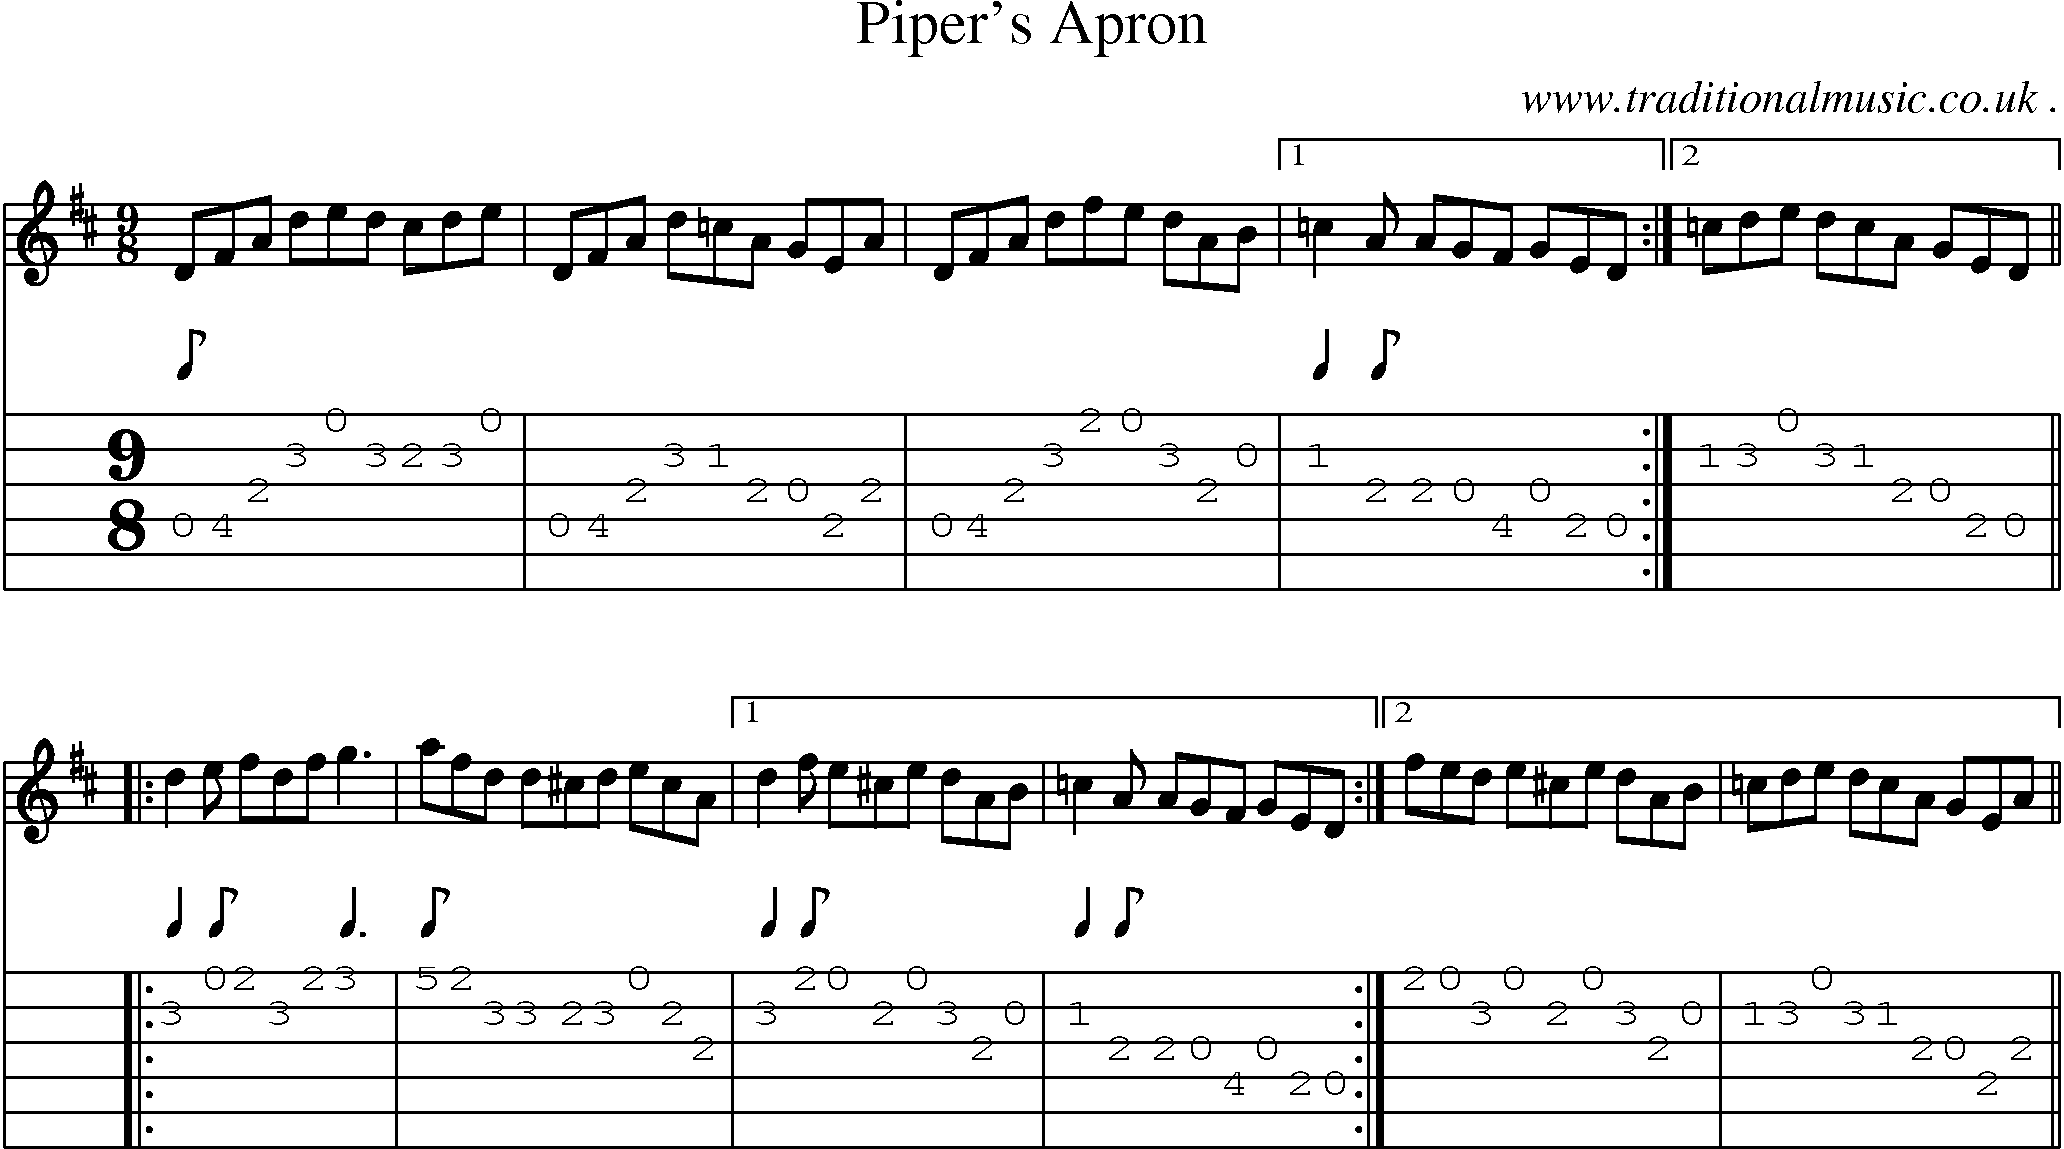 Sheet-Music and Guitar Tabs for Pipers Apron